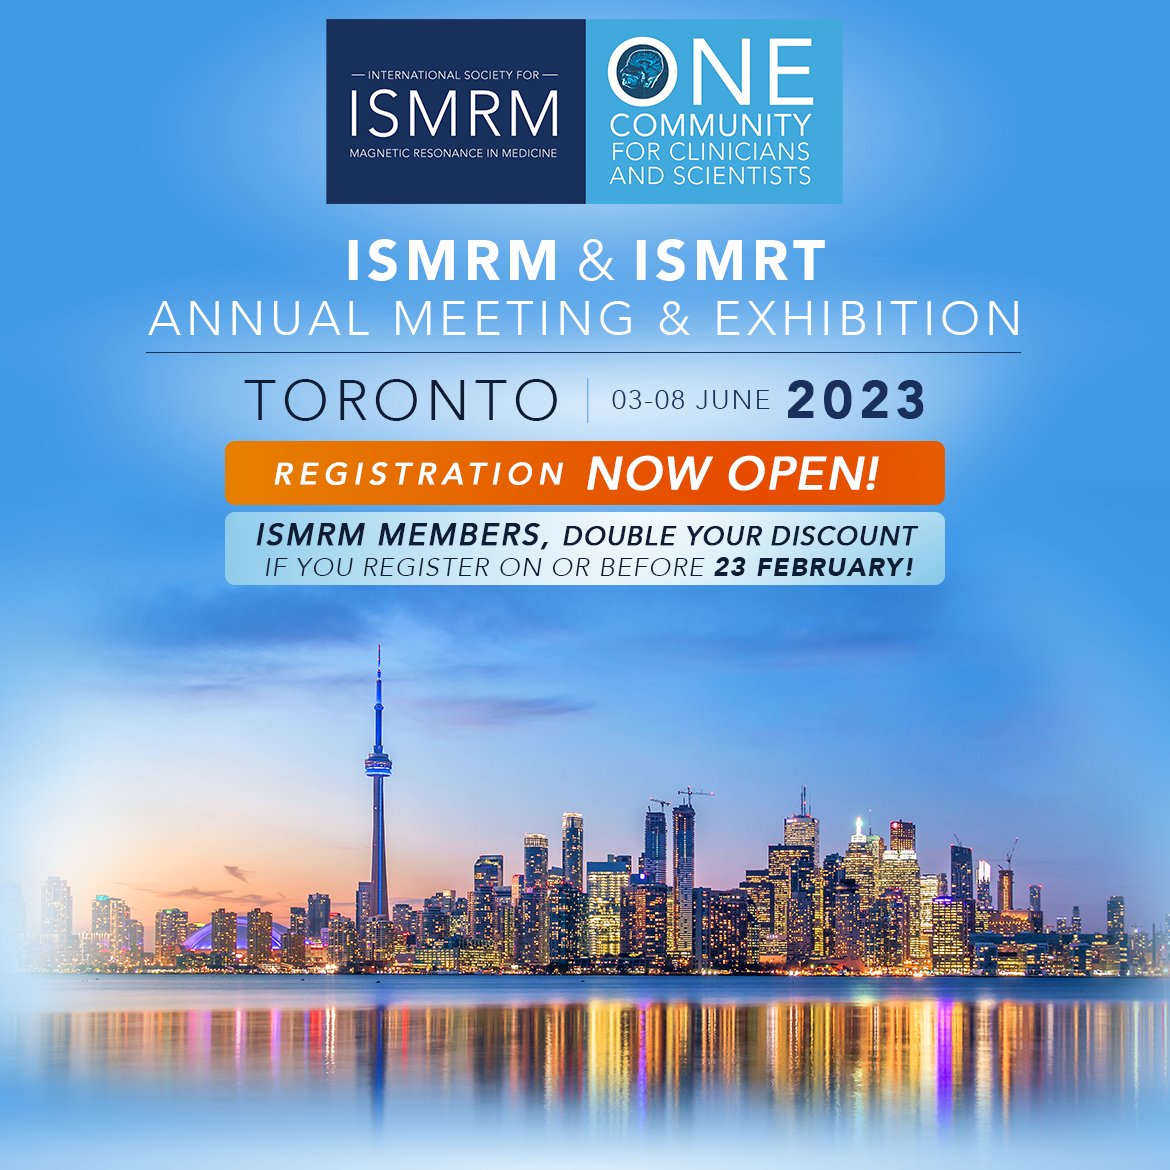 Registration is NOW OPEN for the ISMRM & ISMRT Annual Meeting & Exhibition! ISMRM Members, double your discount if you register on or before 23 February! Register now: bit.ly/3Cyqmma